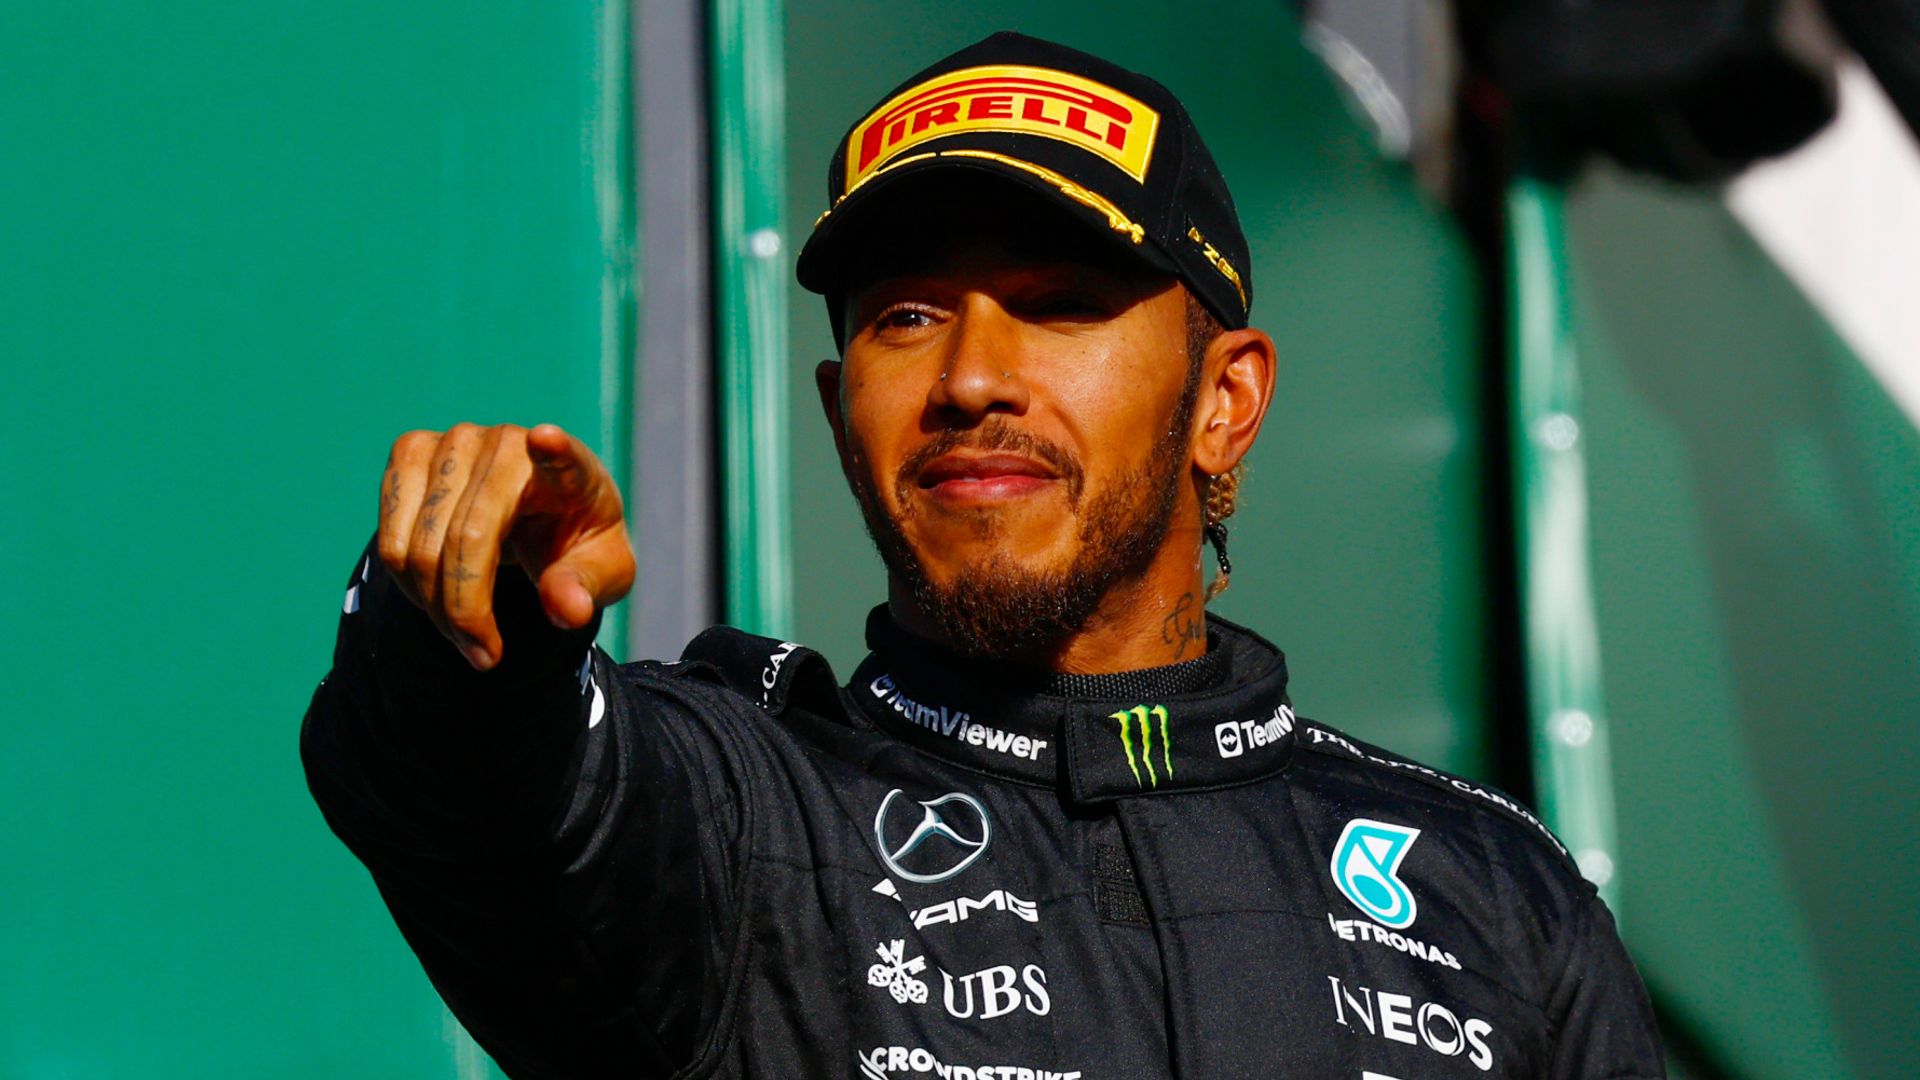 Hamilton hails 'amazing' second place as Russell reveals brake issue